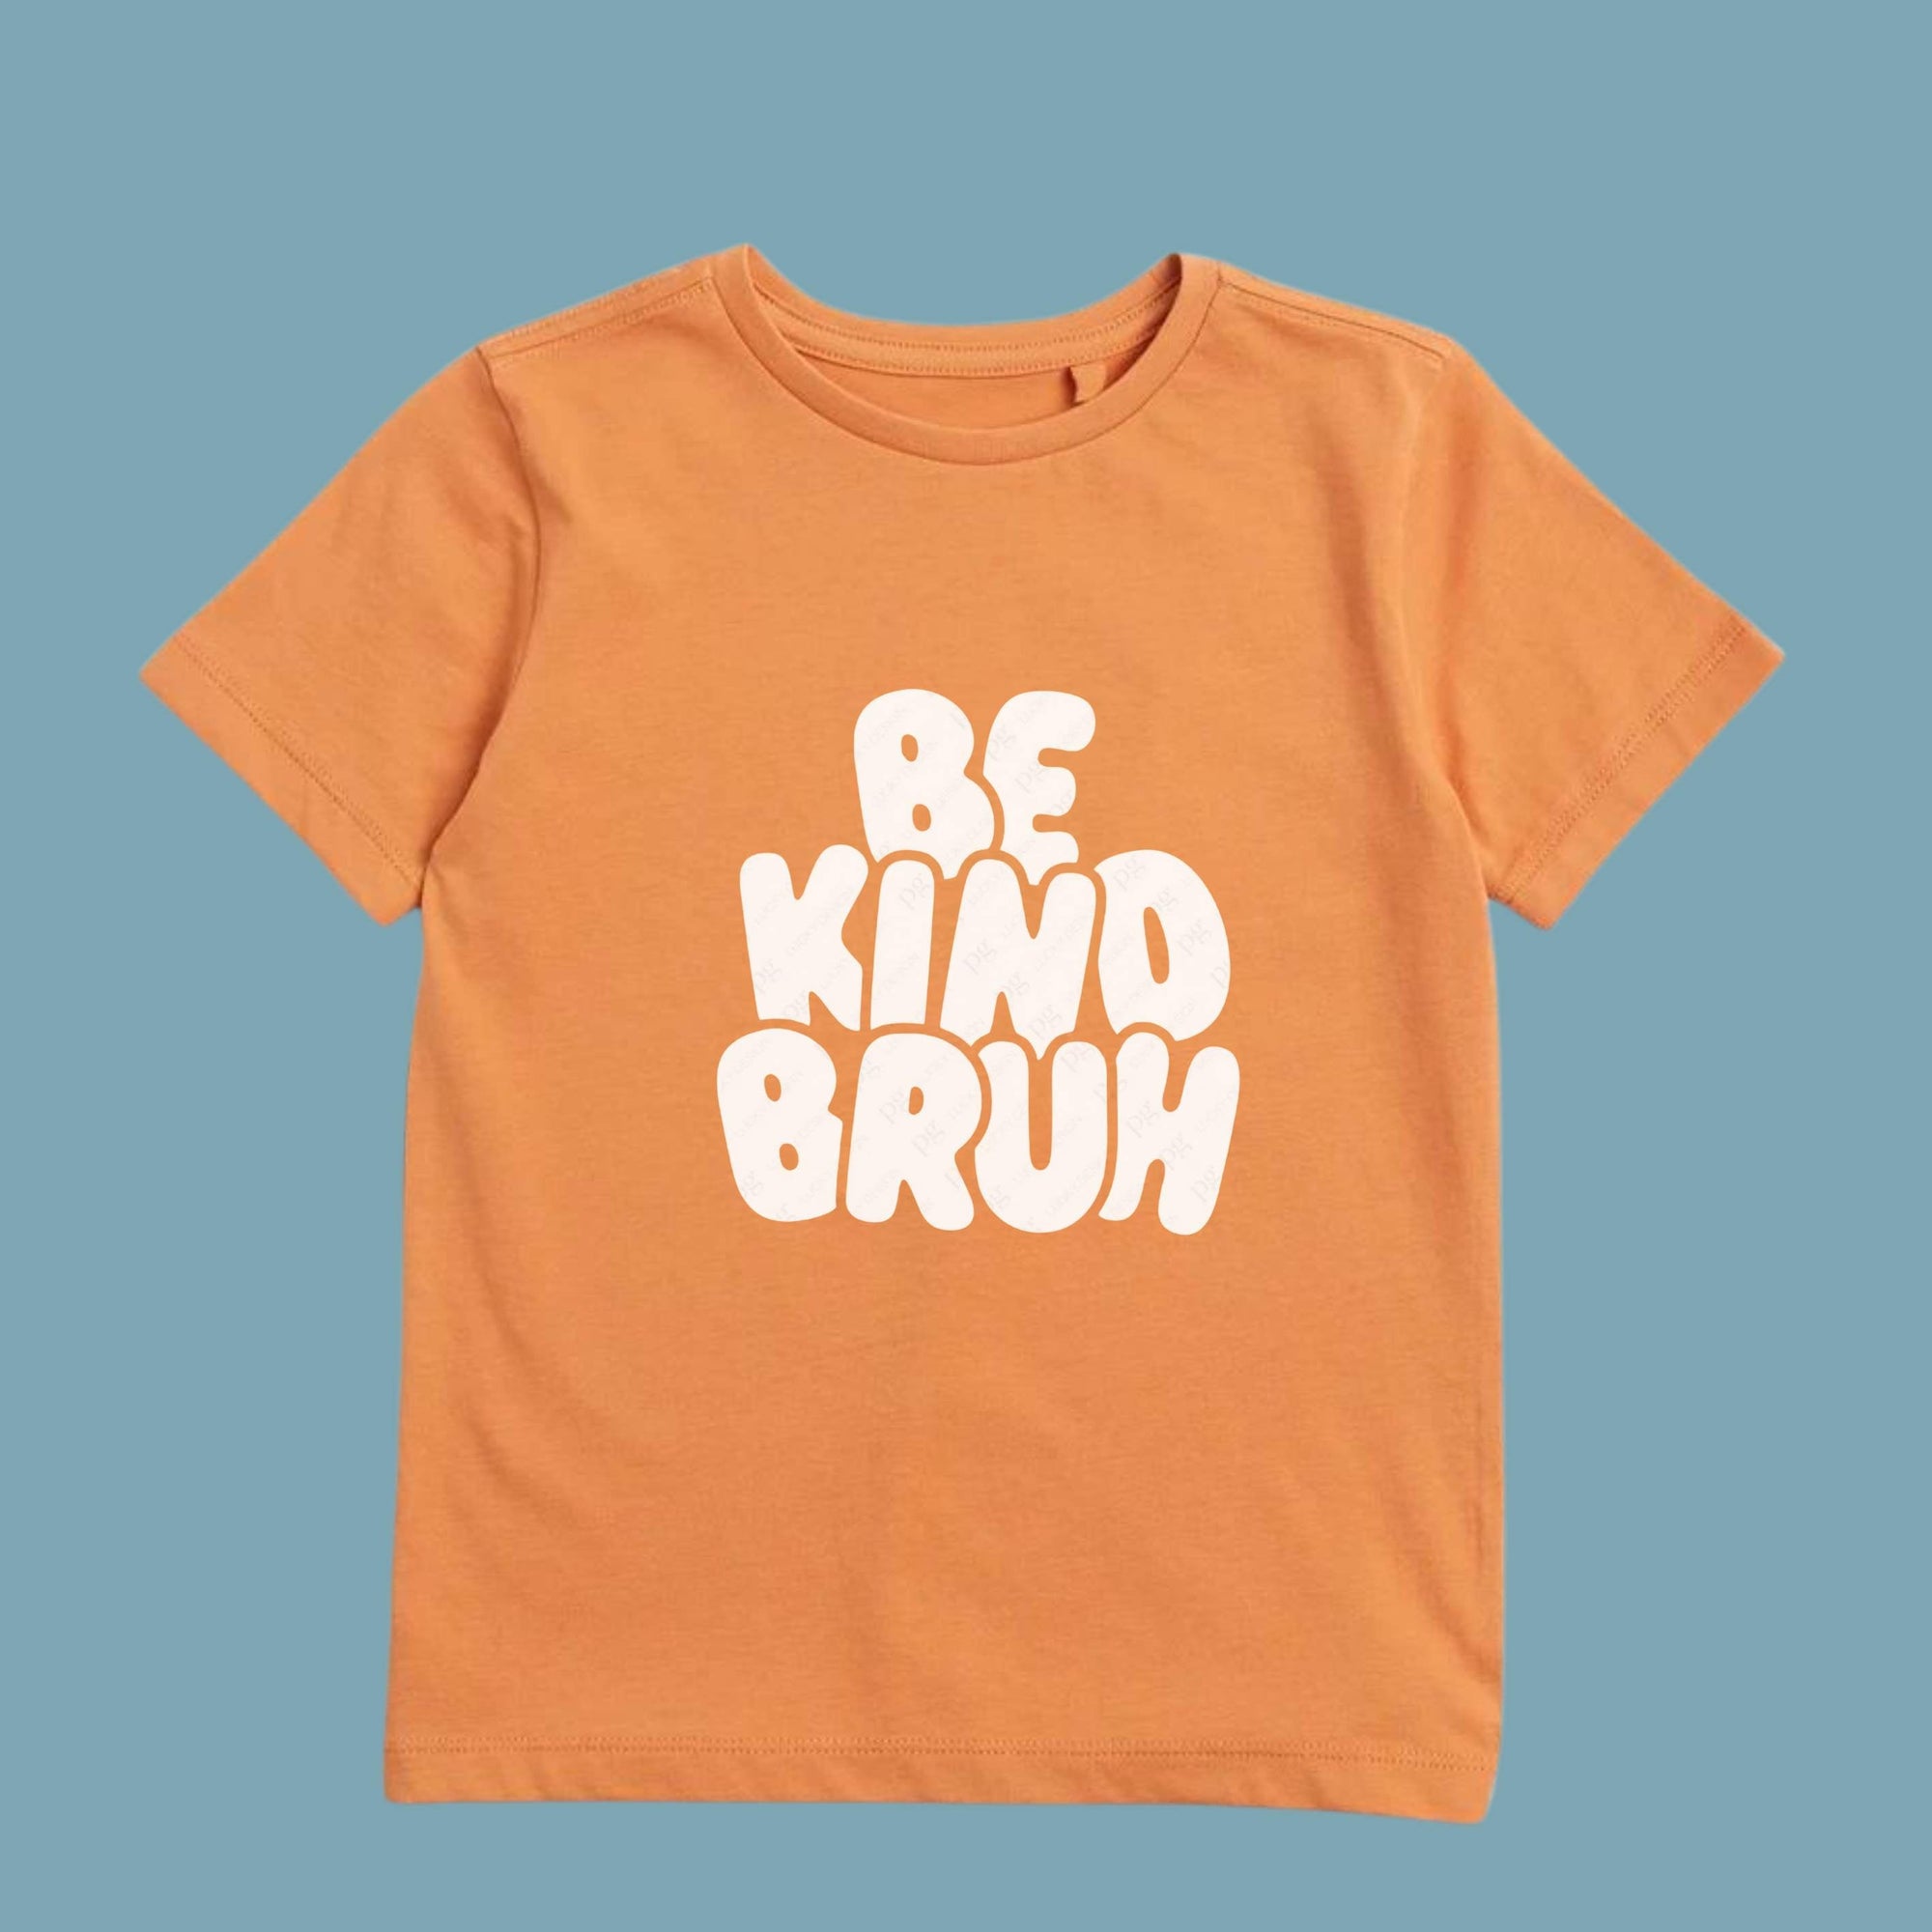 Adults Australia Teachers Harmony Day T-Shirts - 'Be Kind Bruh' Celebrate Harmony Day with 'Be Kind Bruh' T-Shirts. Available in Orange, Black, and White